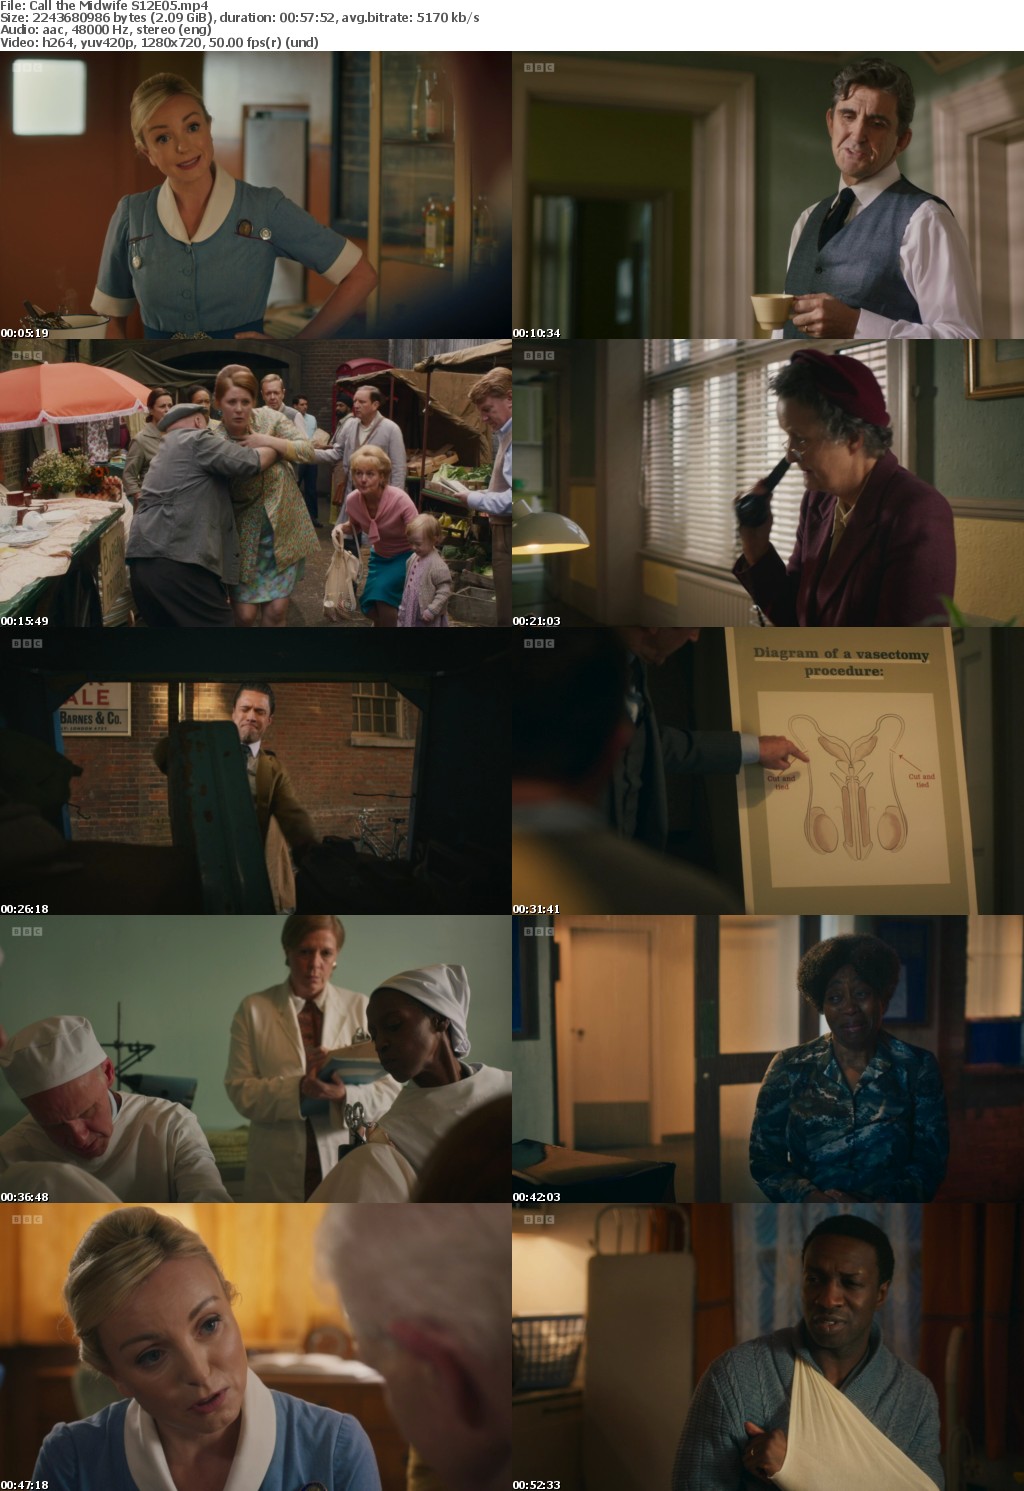 Call the Midwife S12E05 (1280x720p HD, 50fps, soft Eng subs)